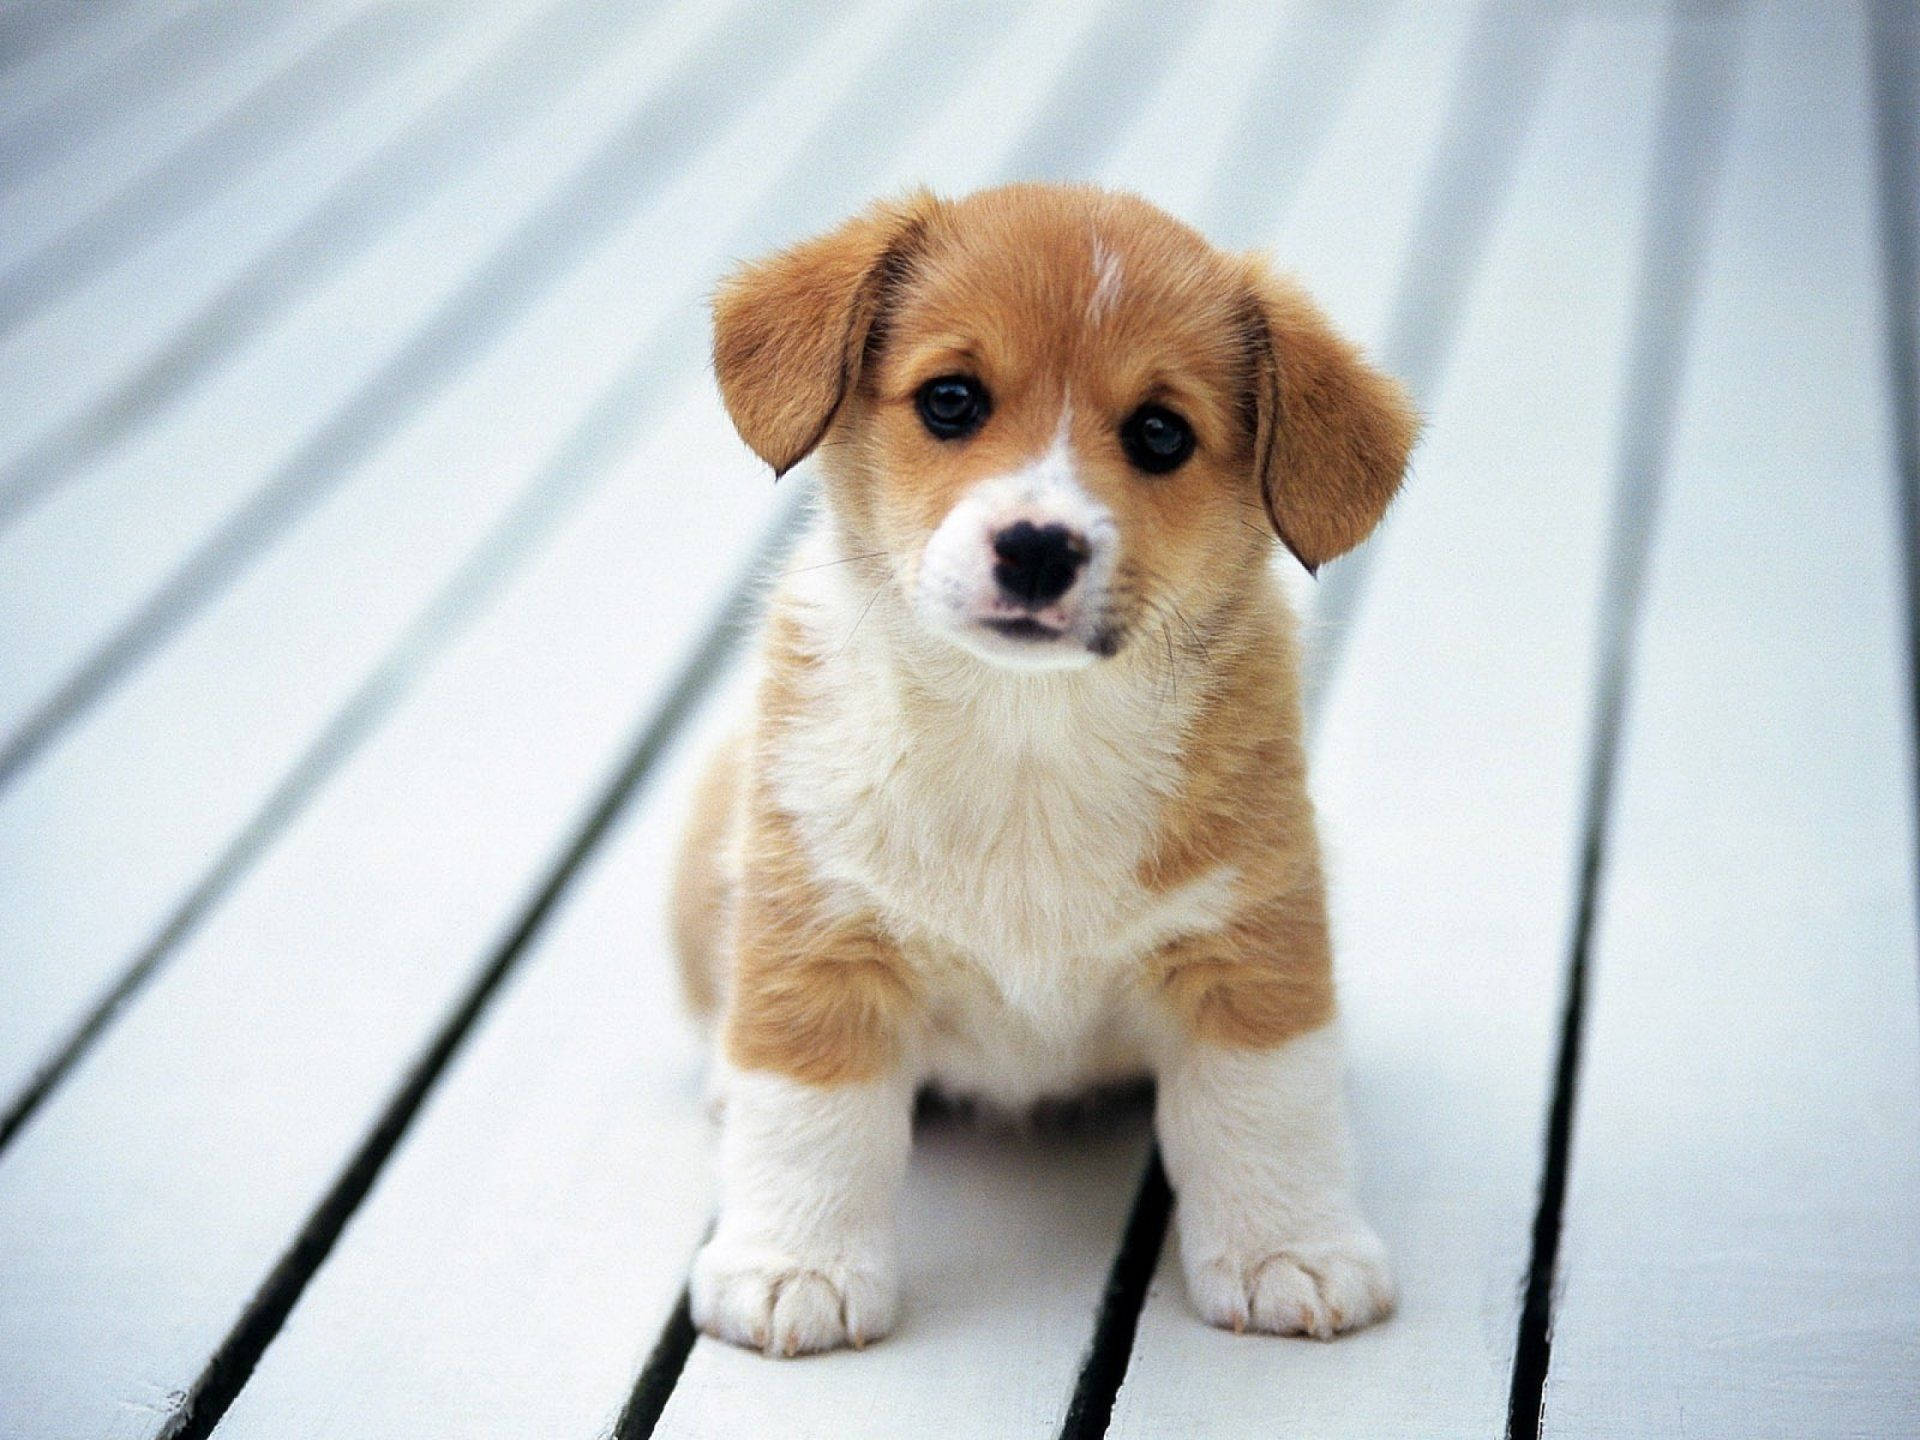 Staring Puppy Picture Background